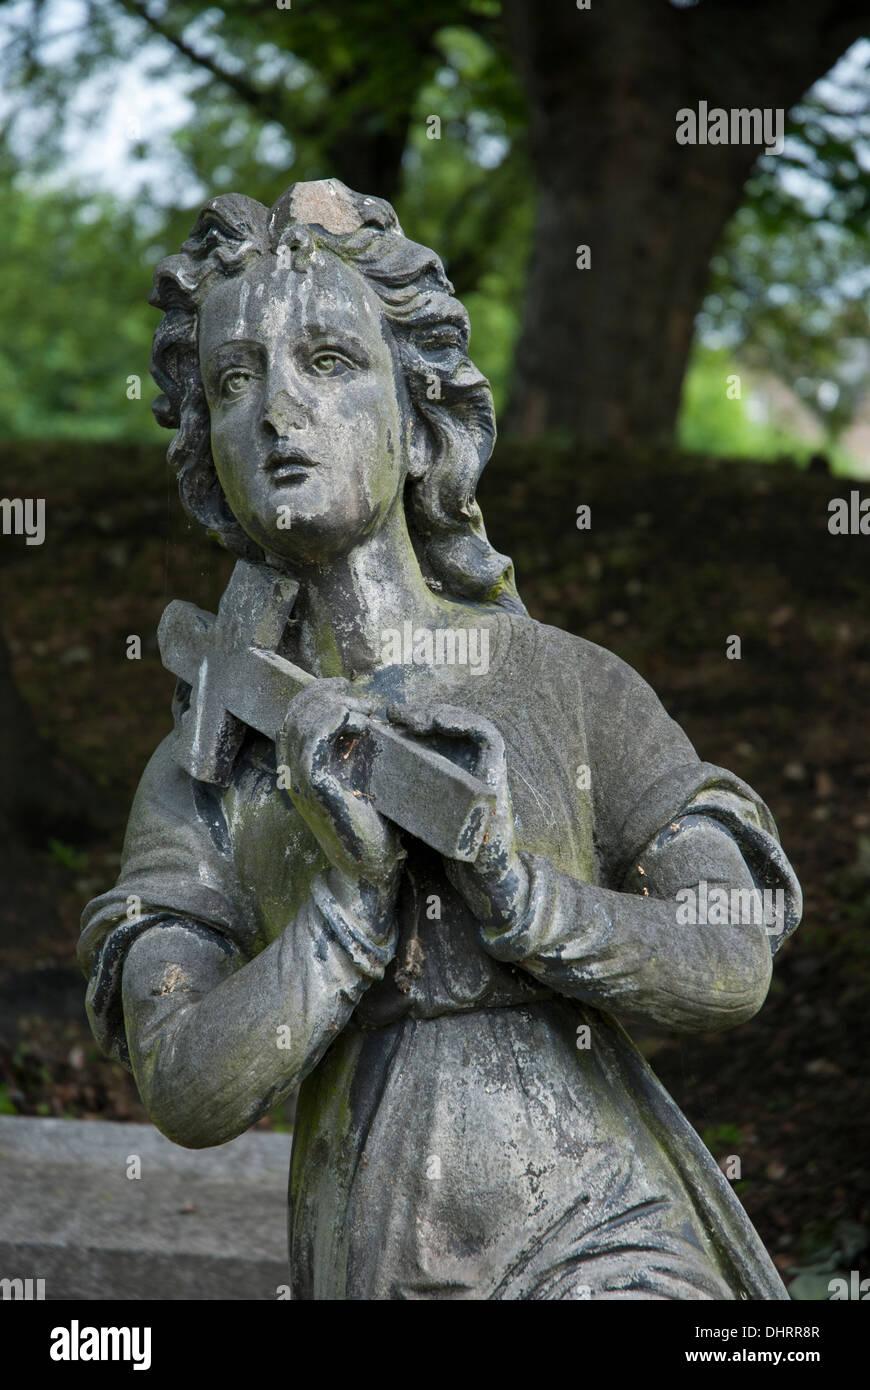 Weathered and damaged statue depicting a woman holding a cross, part of a monument in North Merchiston Burial Ground, Edinburgh. Stock Photo